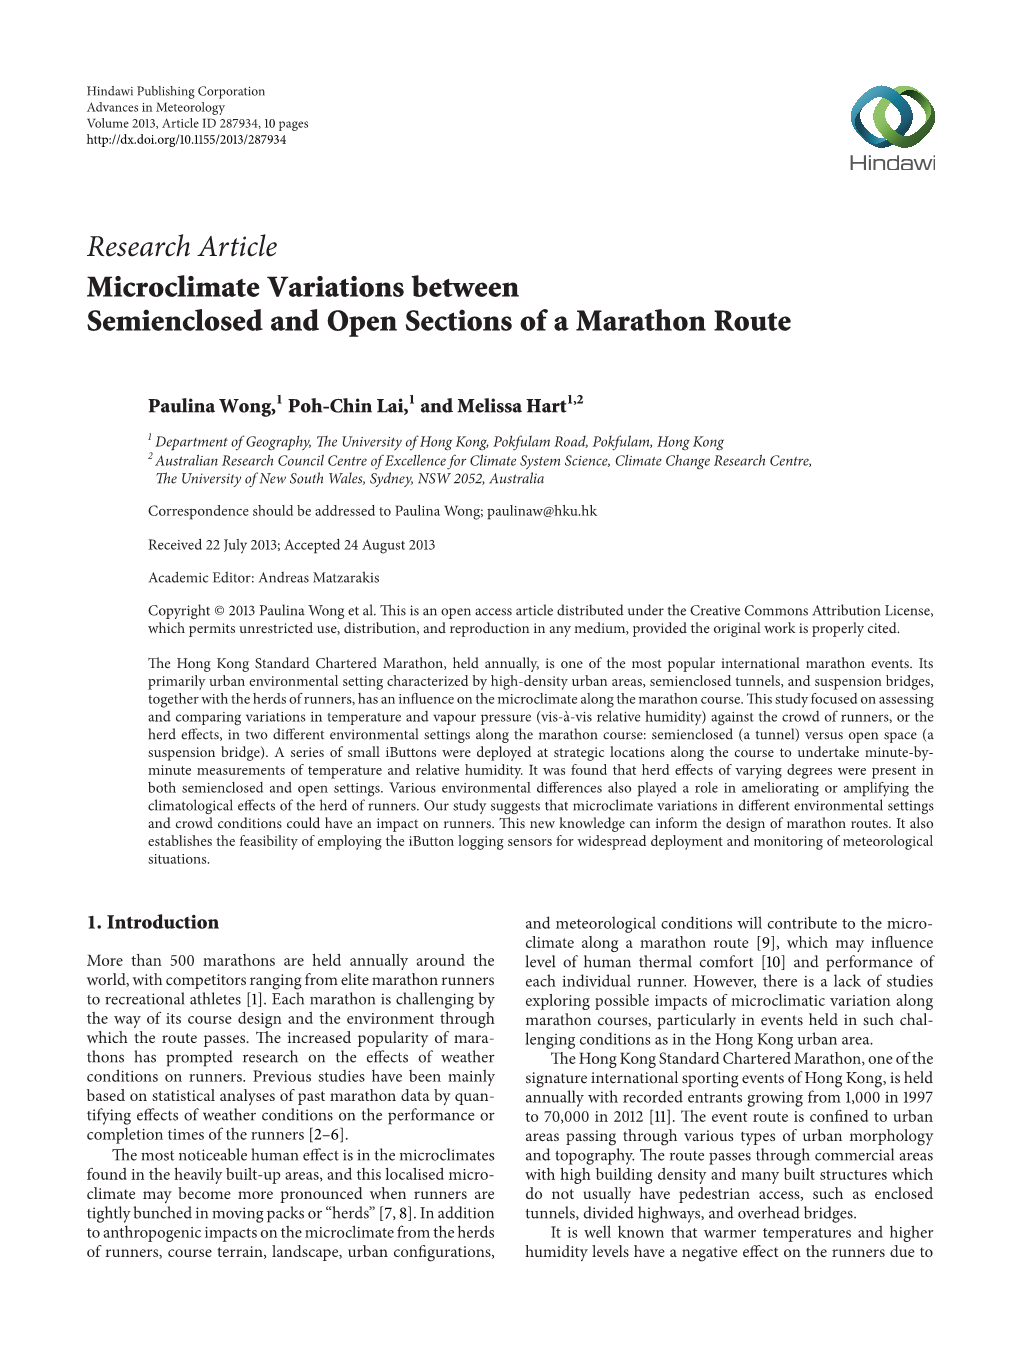 Research Article Microclimate Variations Between Semienclosed and Open Sections of a Marathon Route